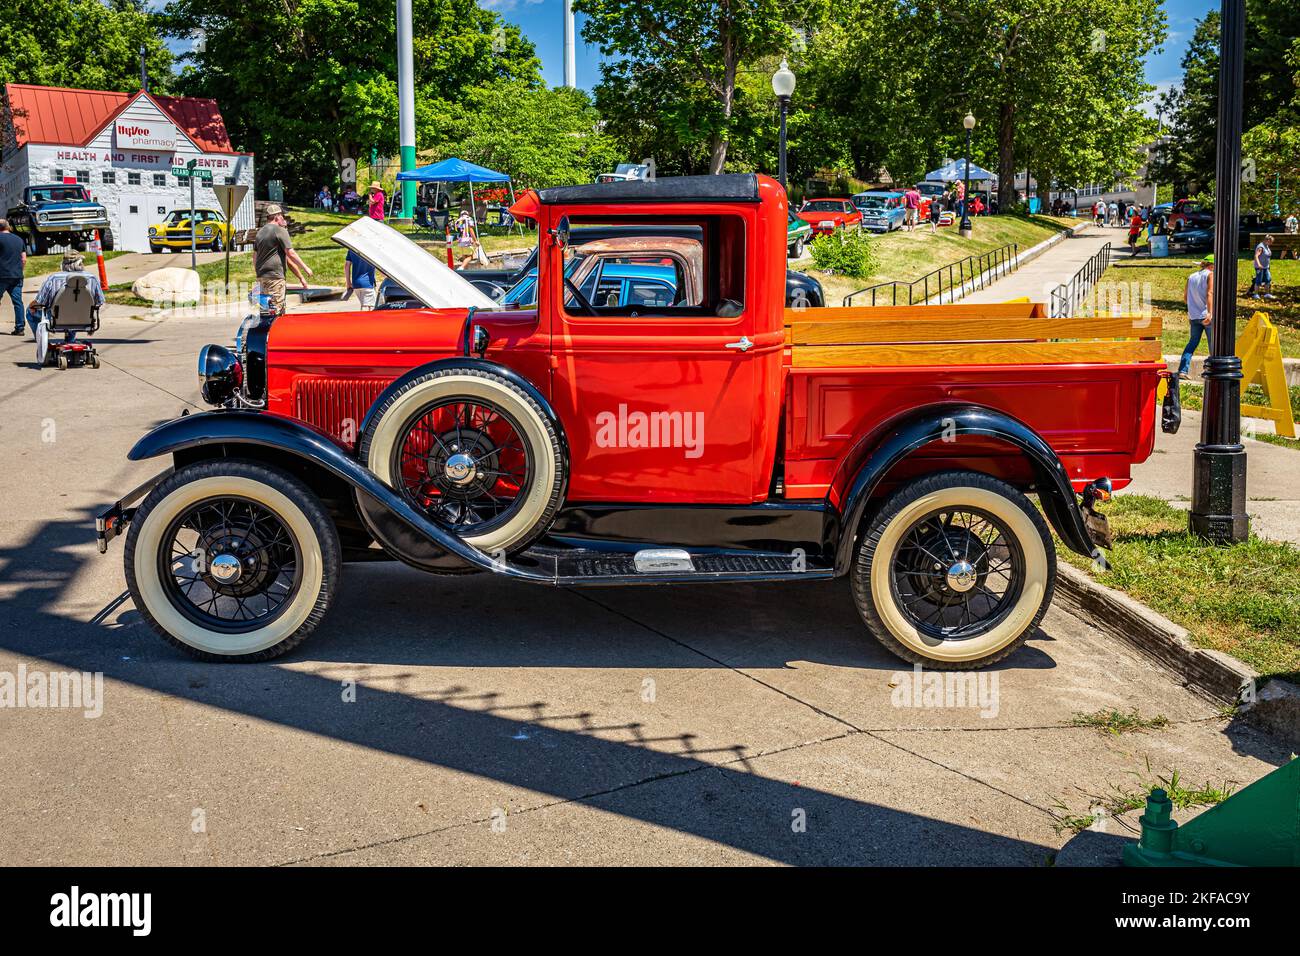 Des Moines, IA - July 02, 2022: High perspective side view of a 1931 Ford Model A Pickup Truck at a local car show. Stock Photo